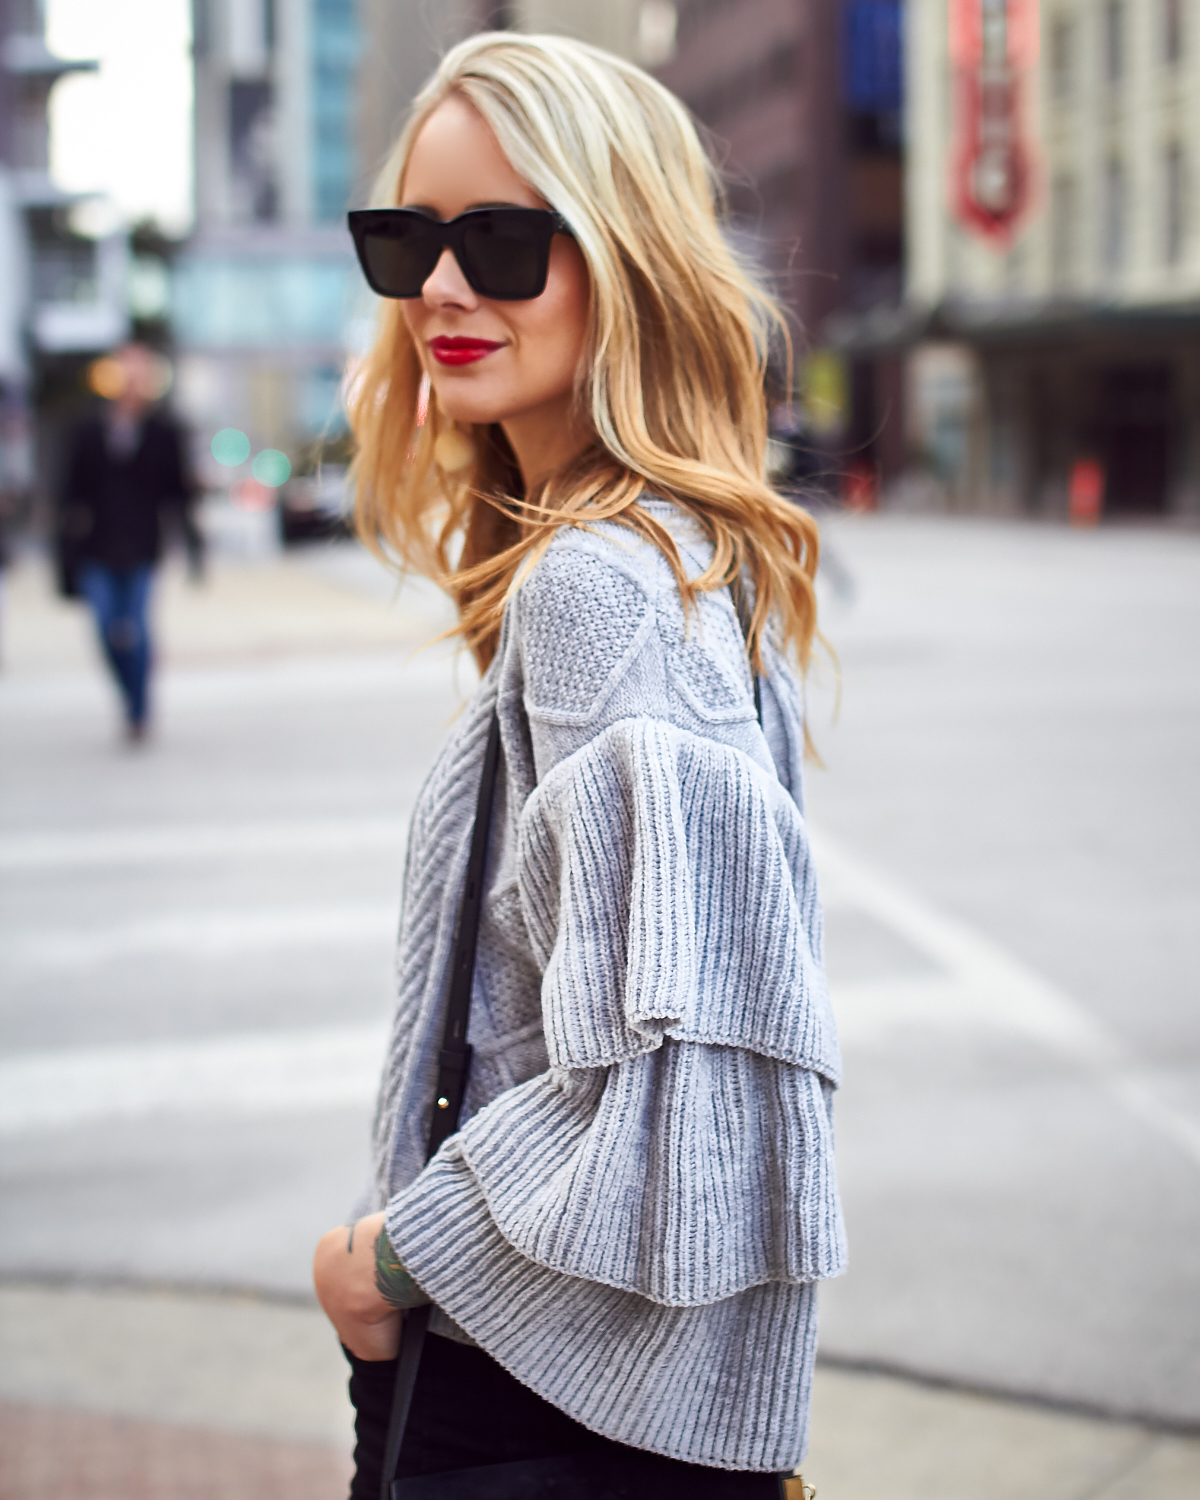 Fall Outfit, Winter Outfit, Grey Ruffle Sleeve Sweater, BonBon Earrings, Black Celine Sunglasses, Red Lipstick